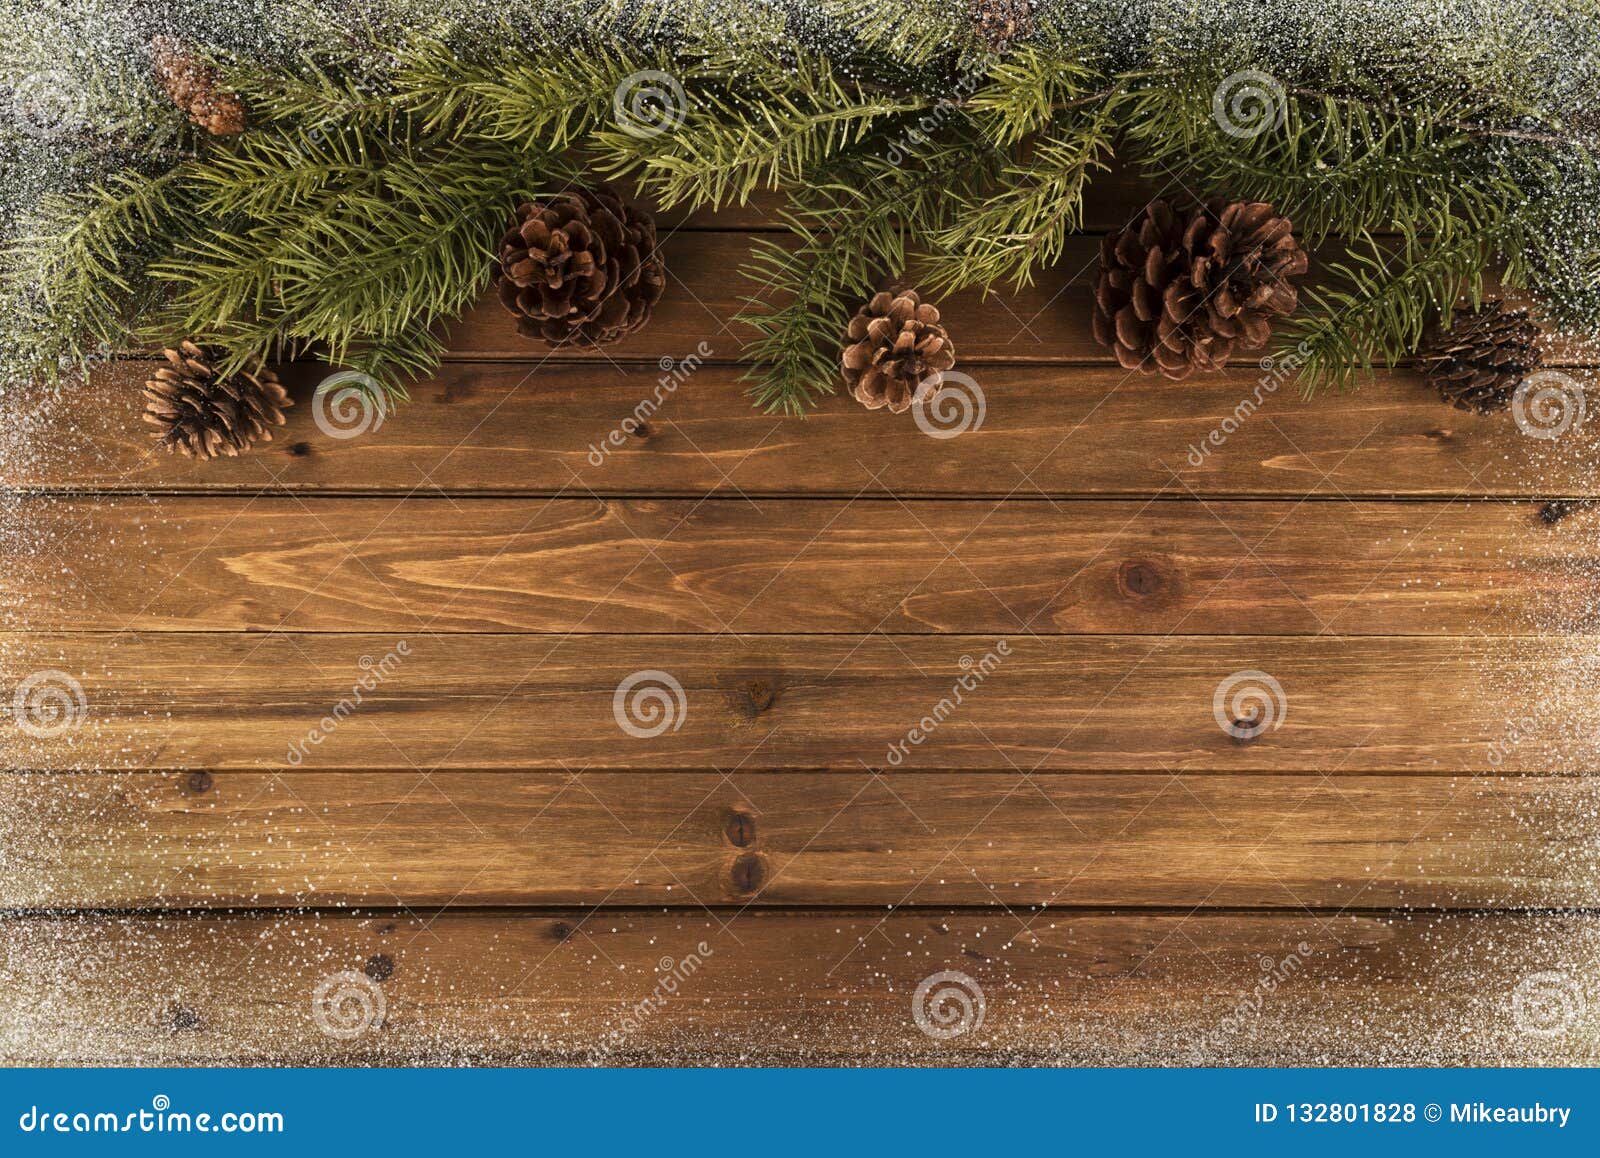 Christmas Tree Branches on Natural Wooden Table in Background. Stock ...